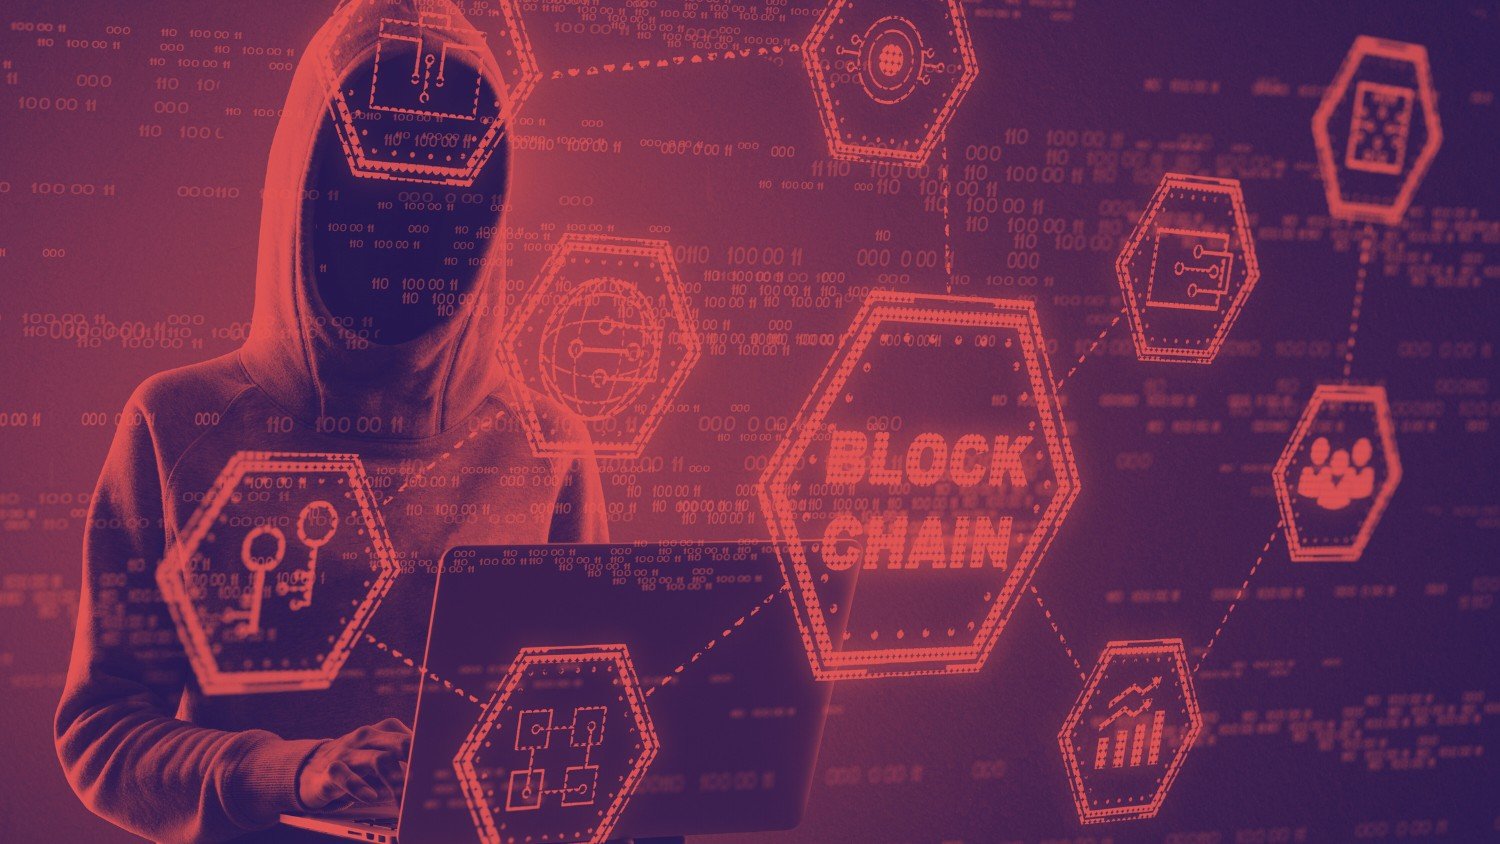 RUBY COIN-Find out How Blockchain Technology Affects the Environment